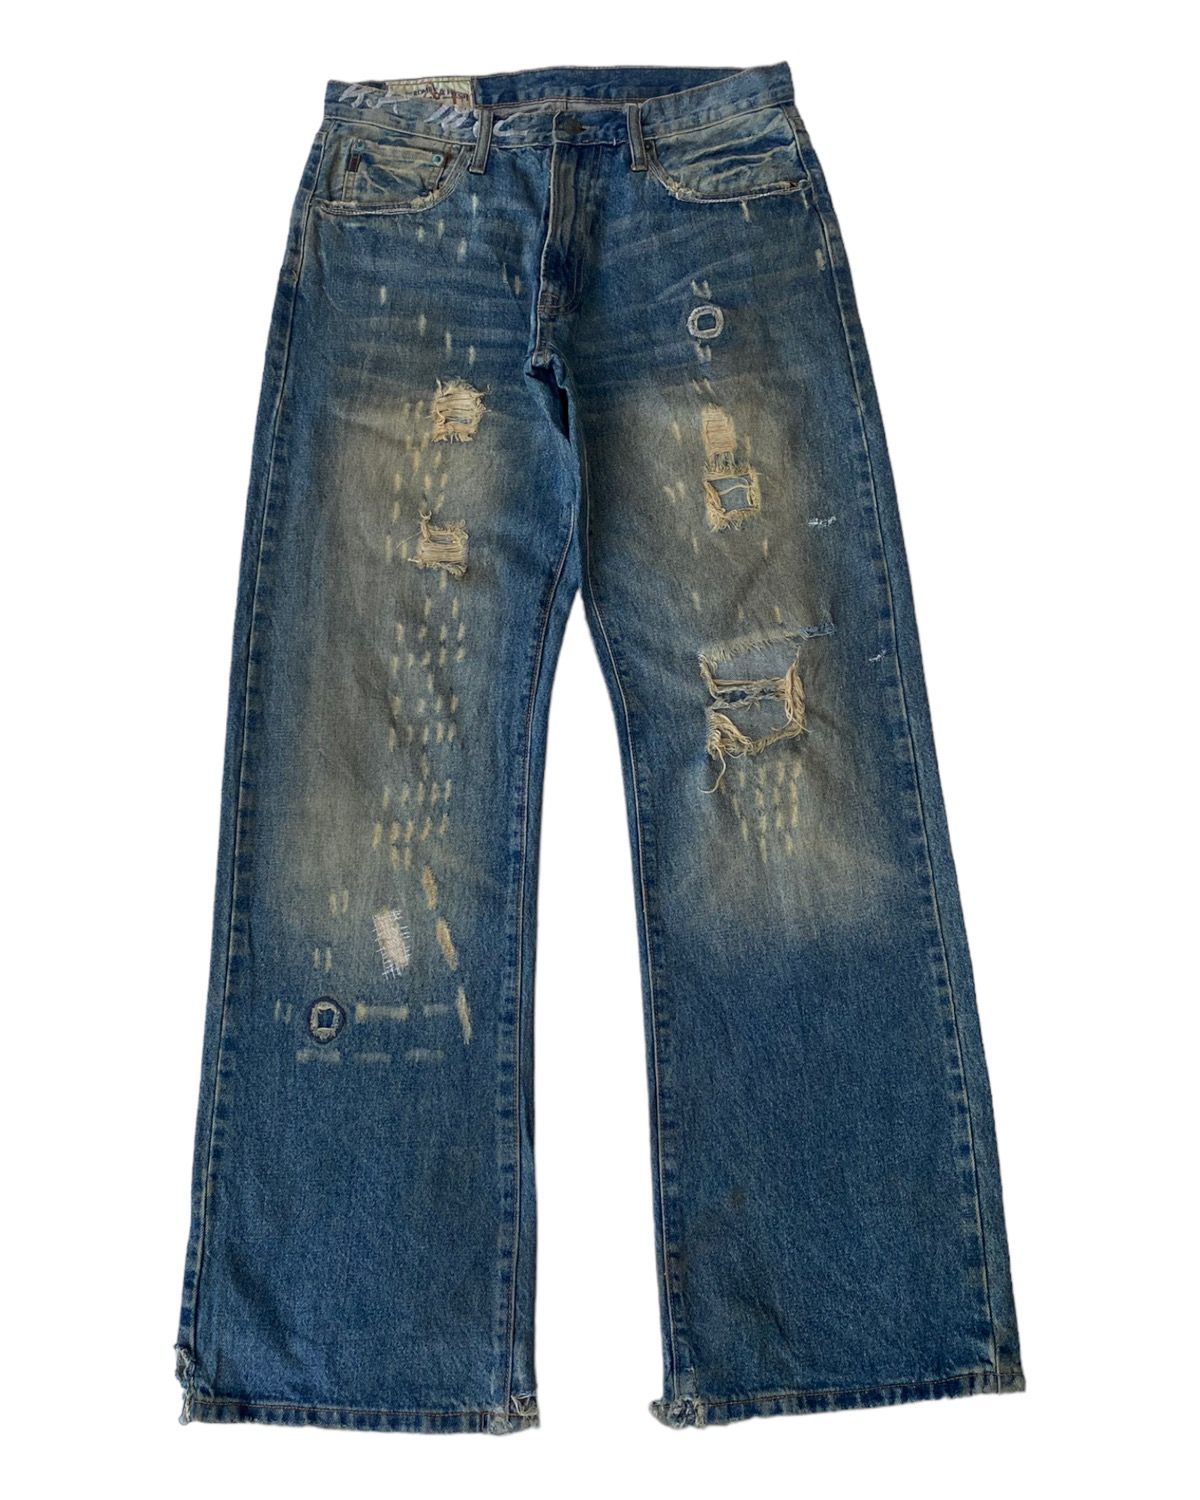 🔥FLARE JEANS RUSTY BAGGY ABERCROMBIE & FITCH DISTRESS DENIM - 1